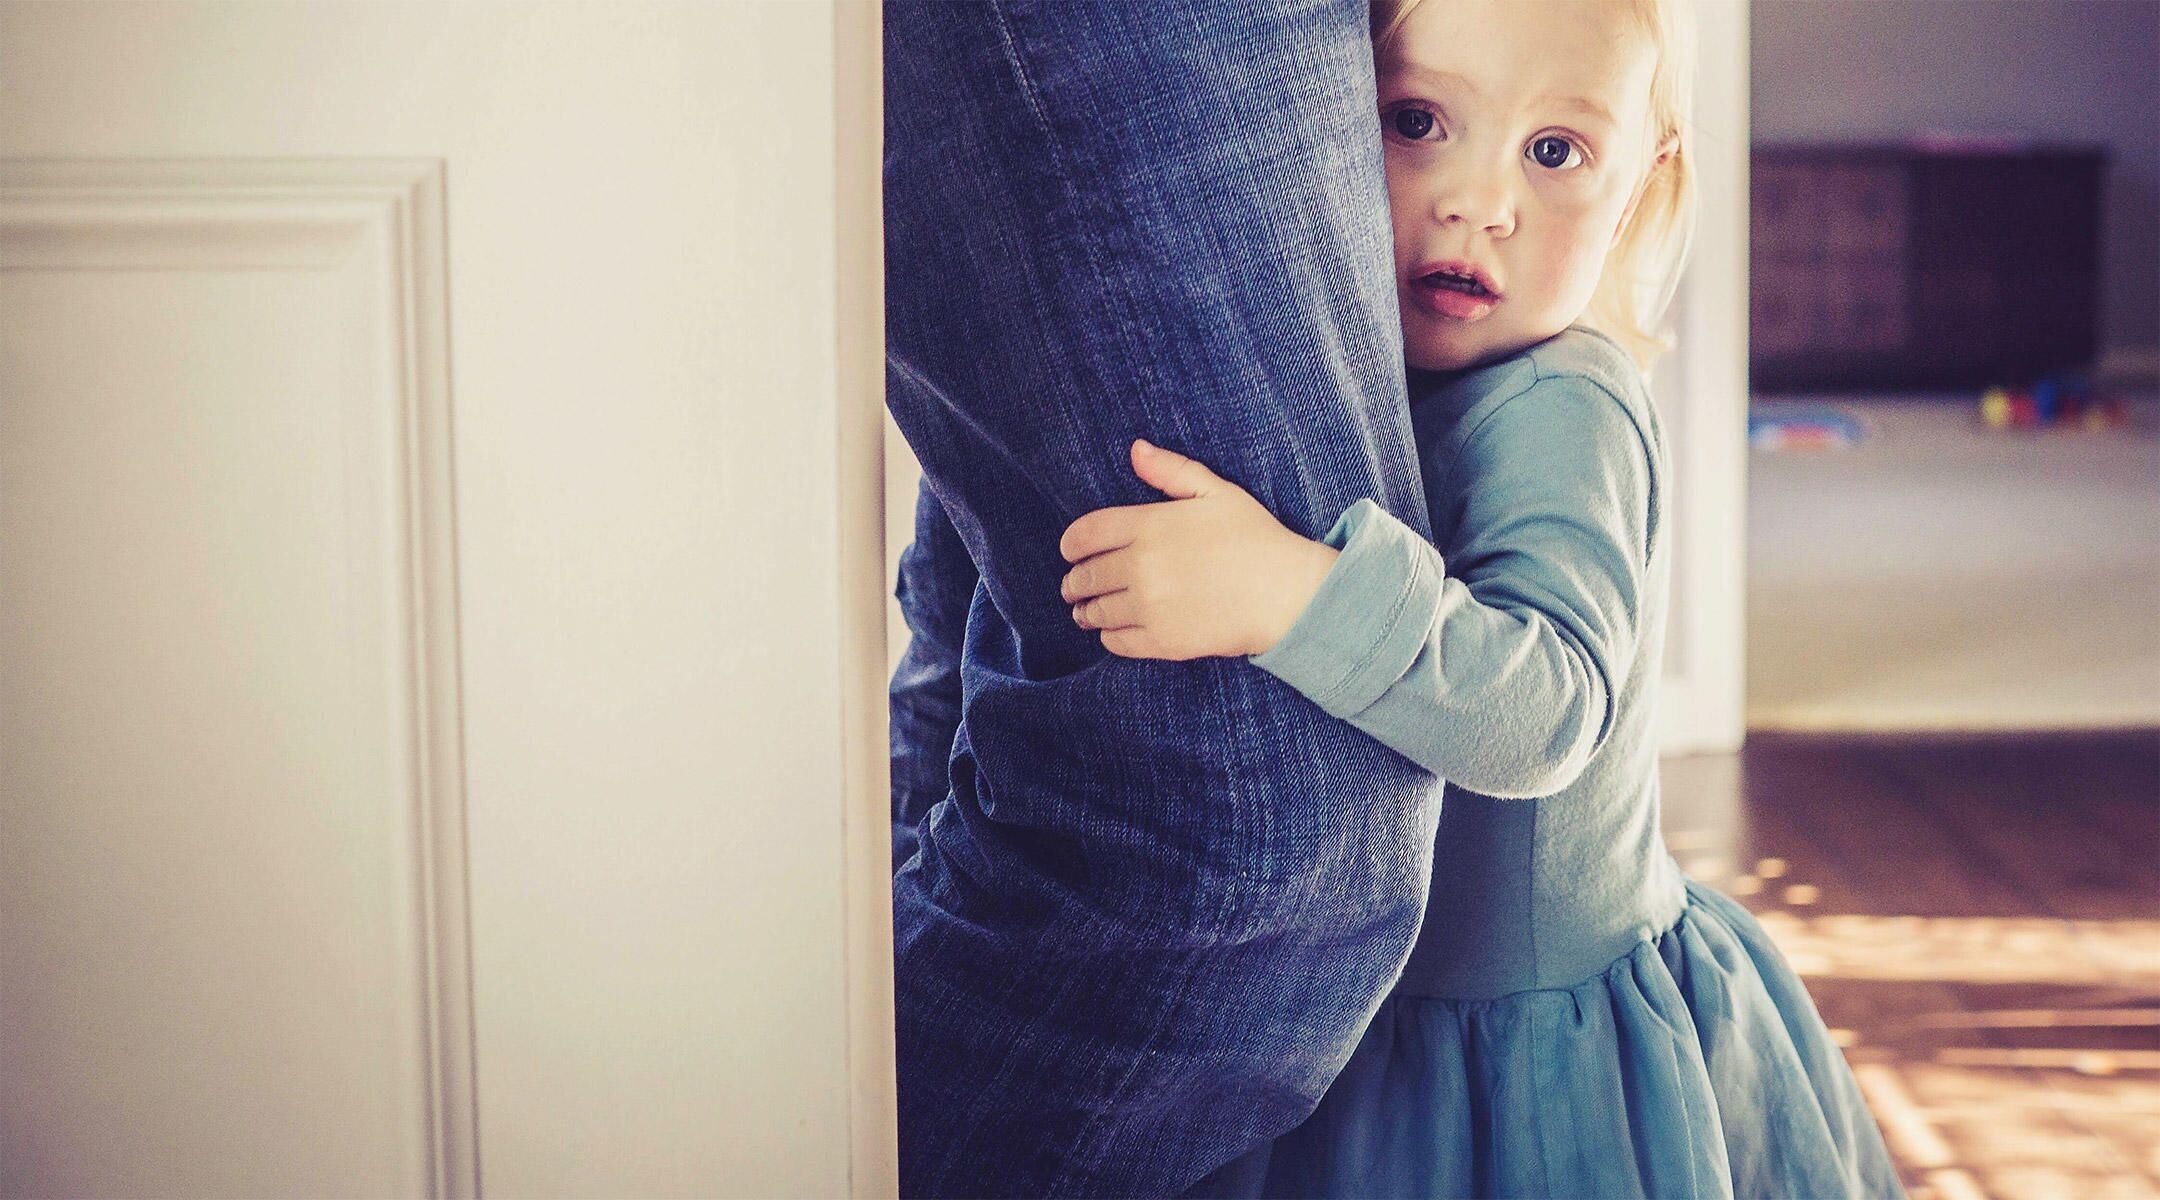 Dealing With Your Child's Separation Anxiety